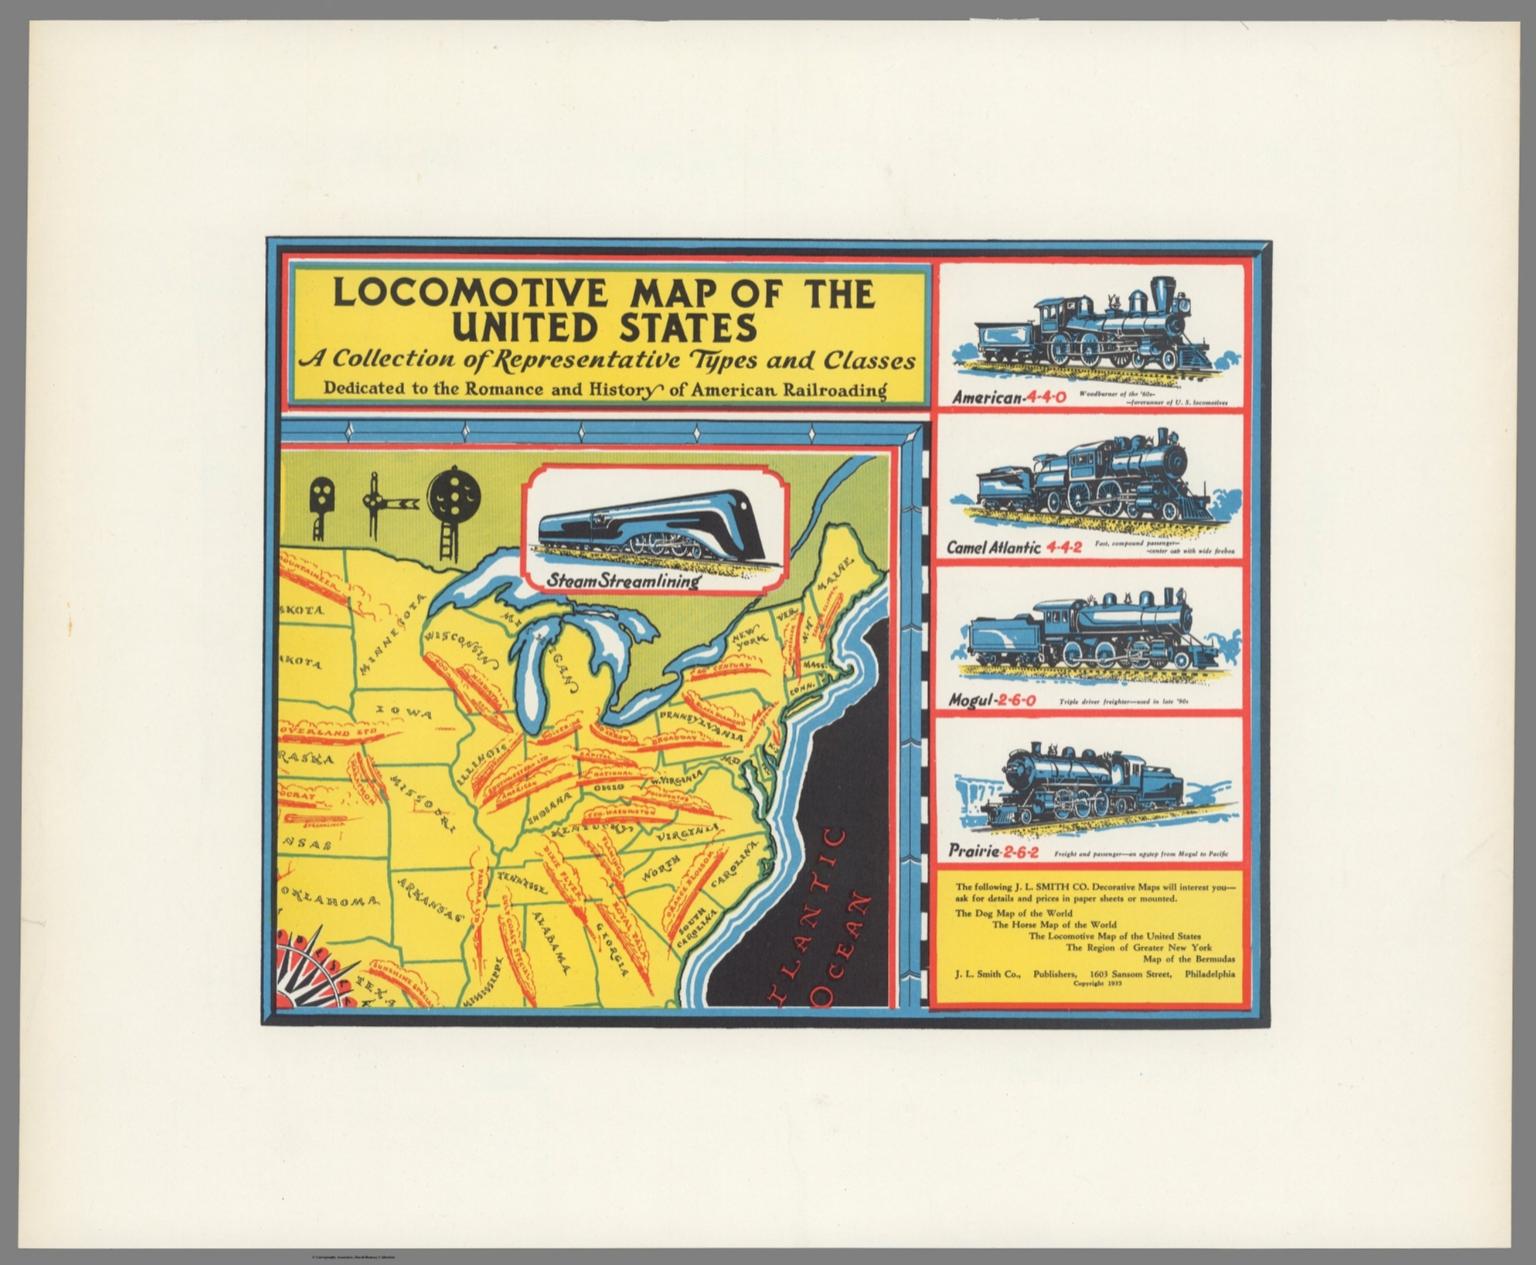 Locomotive Map of the United States.